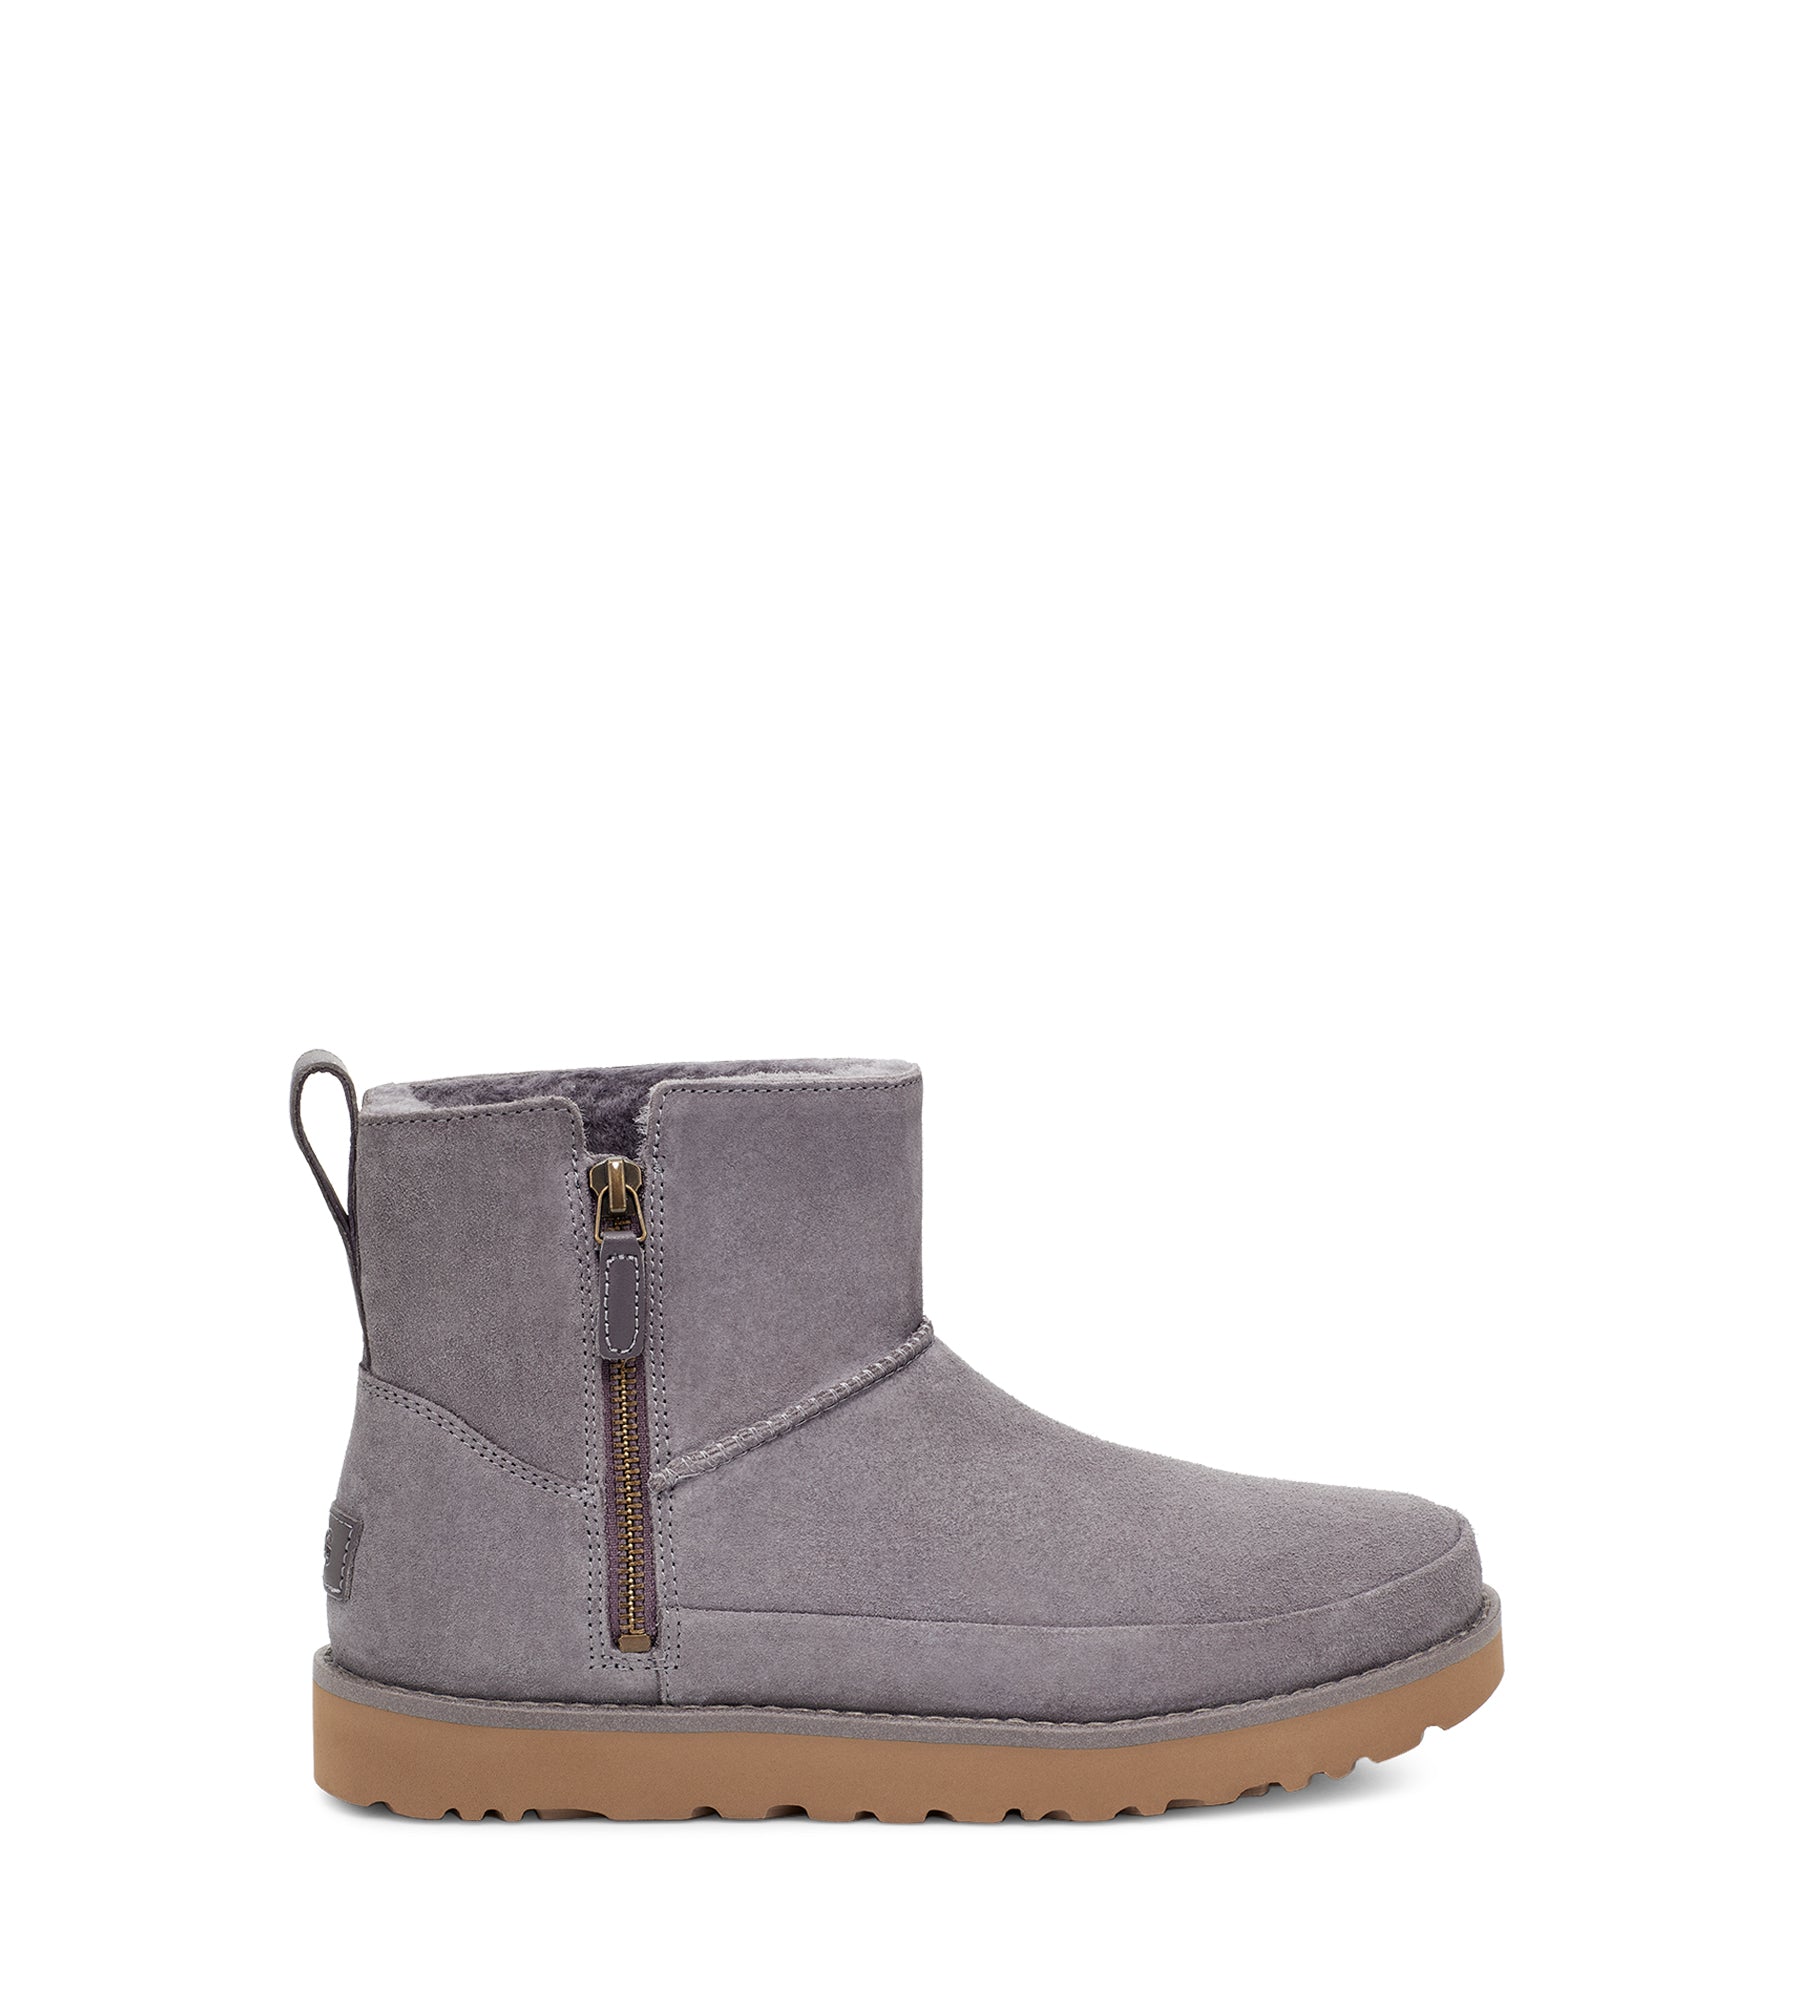 The Women's Classic has the same iconic look and feel as the traditional Classic.  Ugg has added a side-zip construction for easy on and off, plus a water-resistant suede upper to help preserve the rich character of the material. Lined in our famous sheepskin and luxurious UGGplus wool blend, the Women's Classic Zip Mini Boot incorporates a lightweight, cushioned sole for an ultra-soft step. Dress it up with trousers and cashmere, or go easy with jeans and a plaid flannel.